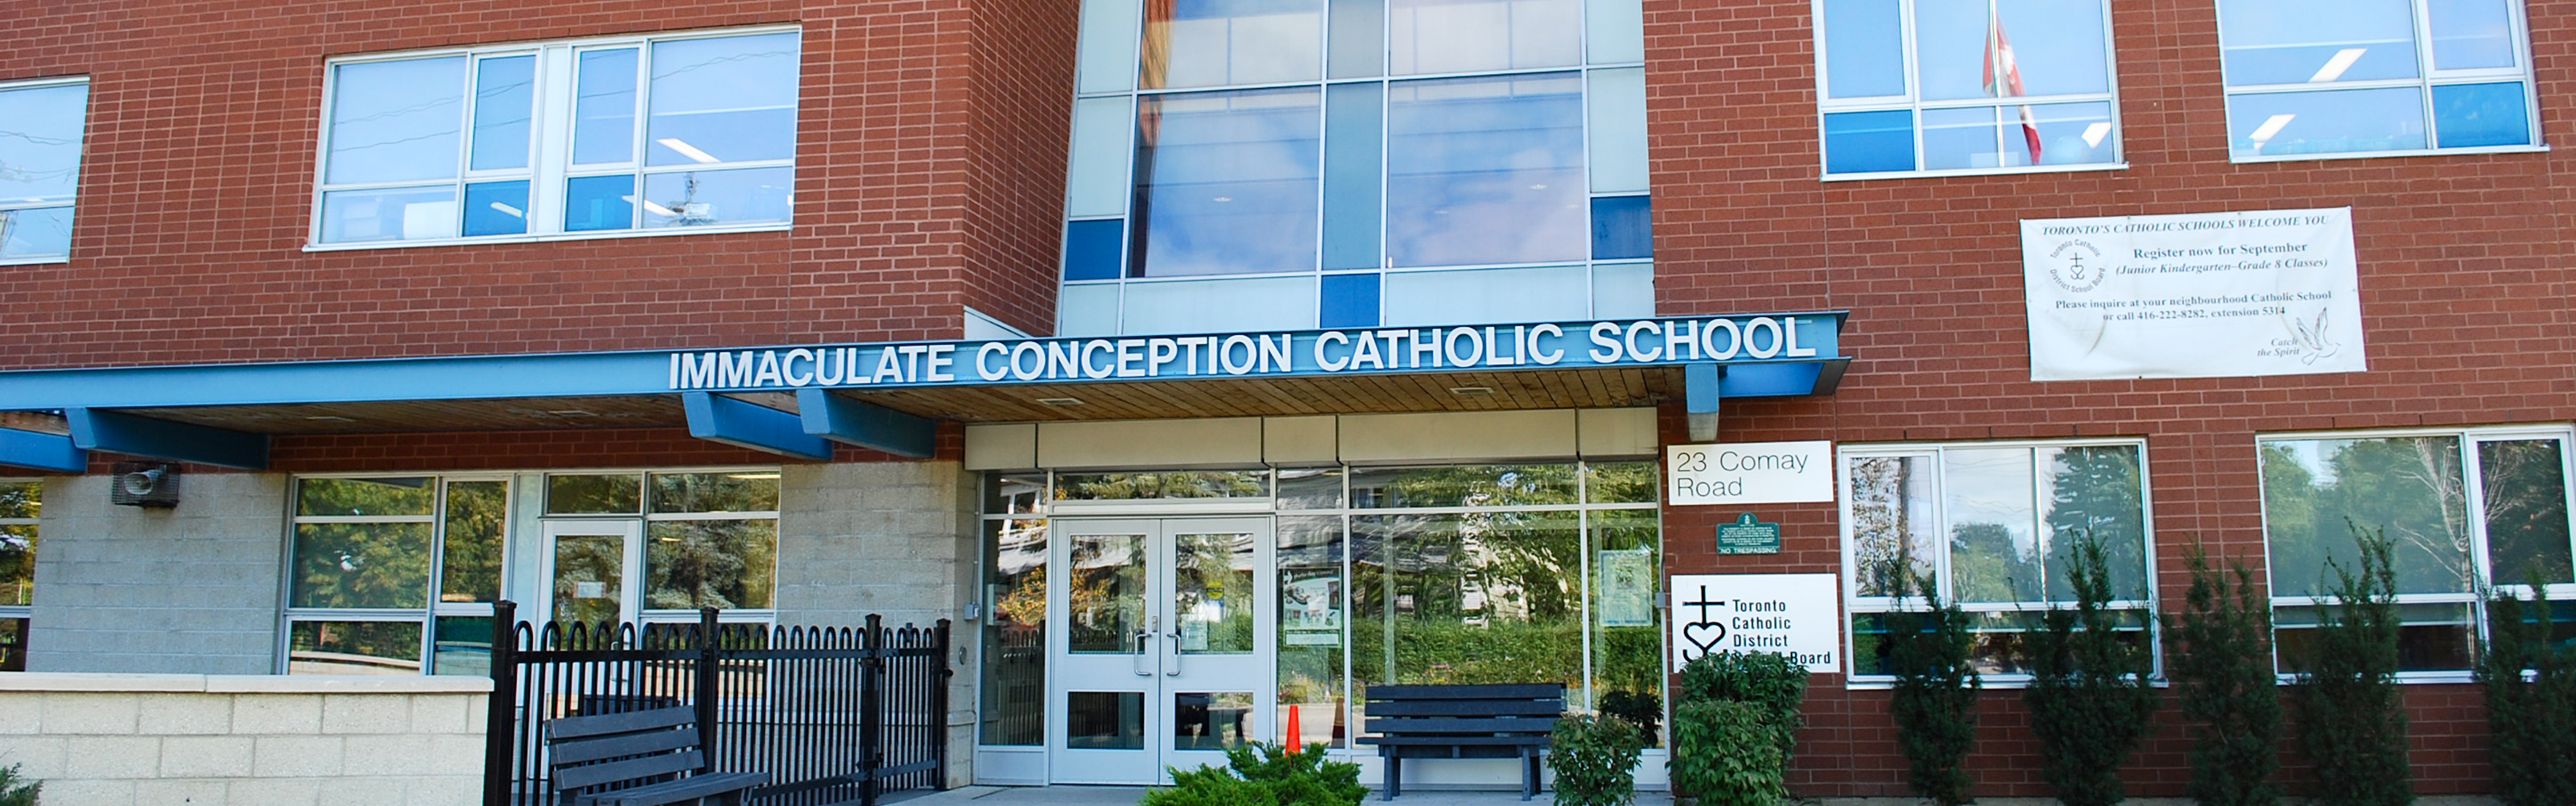 Front of the Immaculate Conception Catholic School building